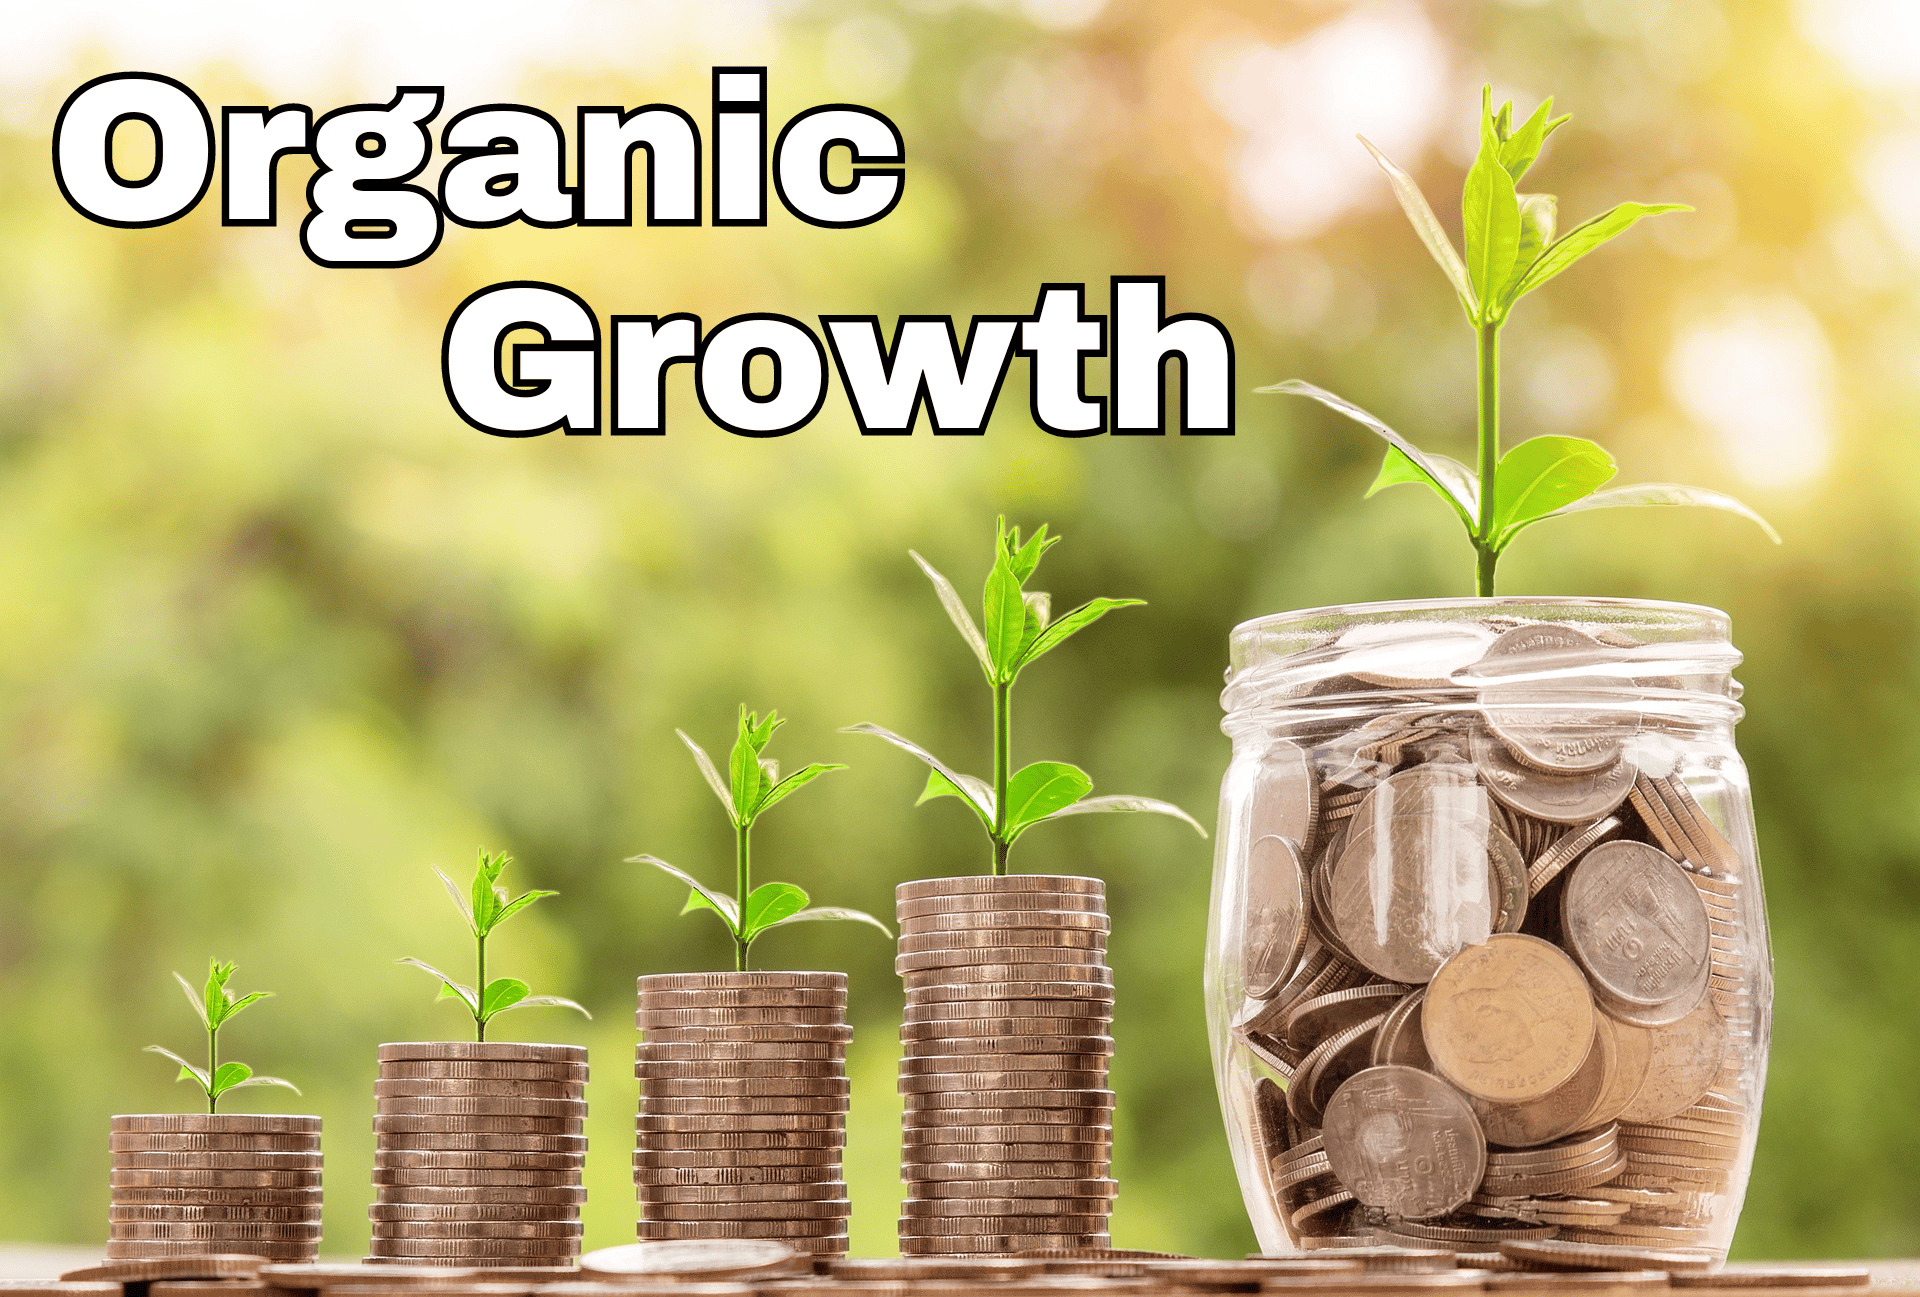 Photo of money growth which equates with organic traffic growth. The more traffic the more money you can earn. Text overlay states: Organic Growth